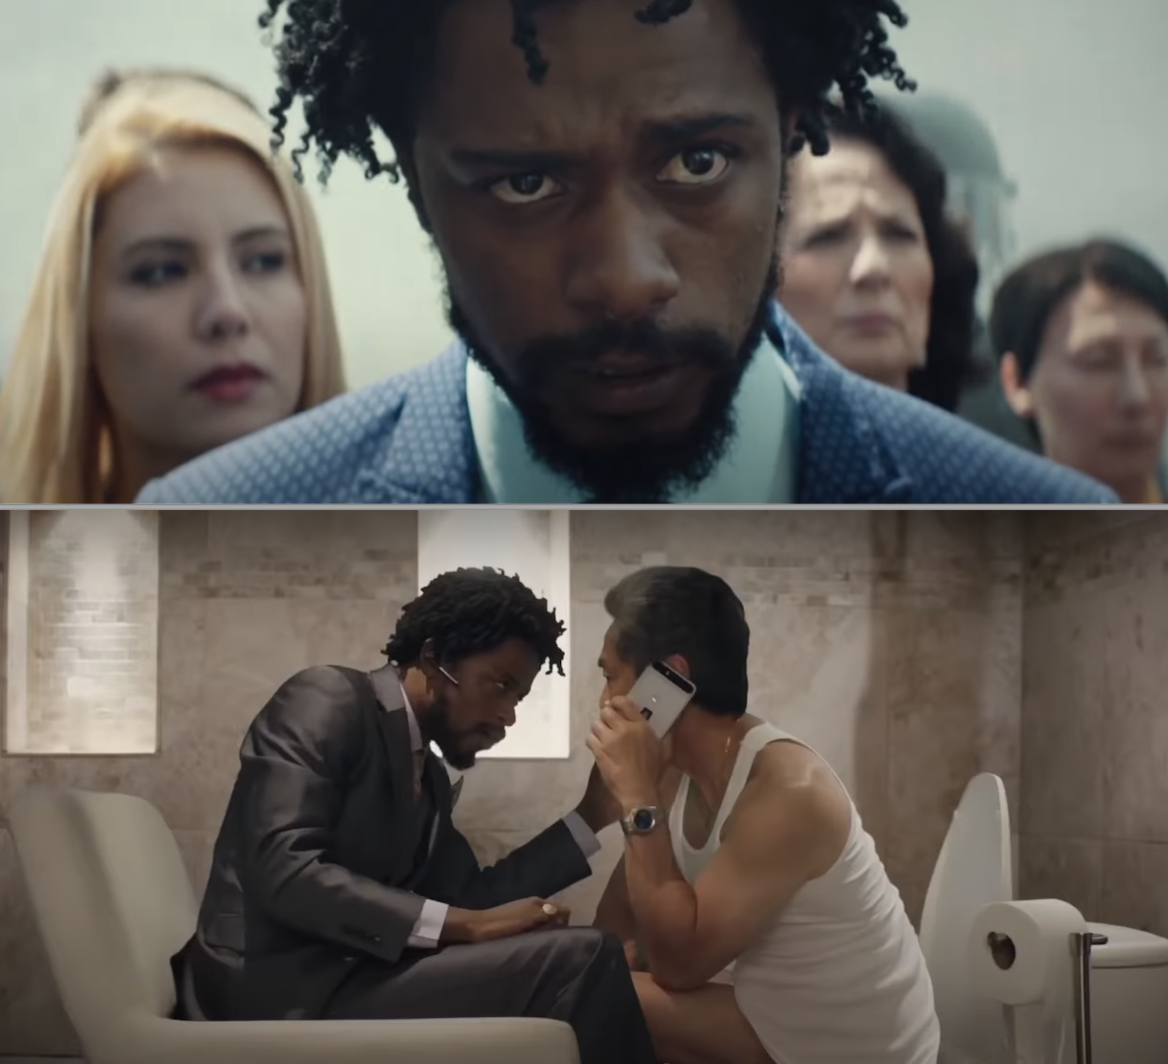 Lakeith Stanfield in a blue suit and talking to someone on the toilet, lol